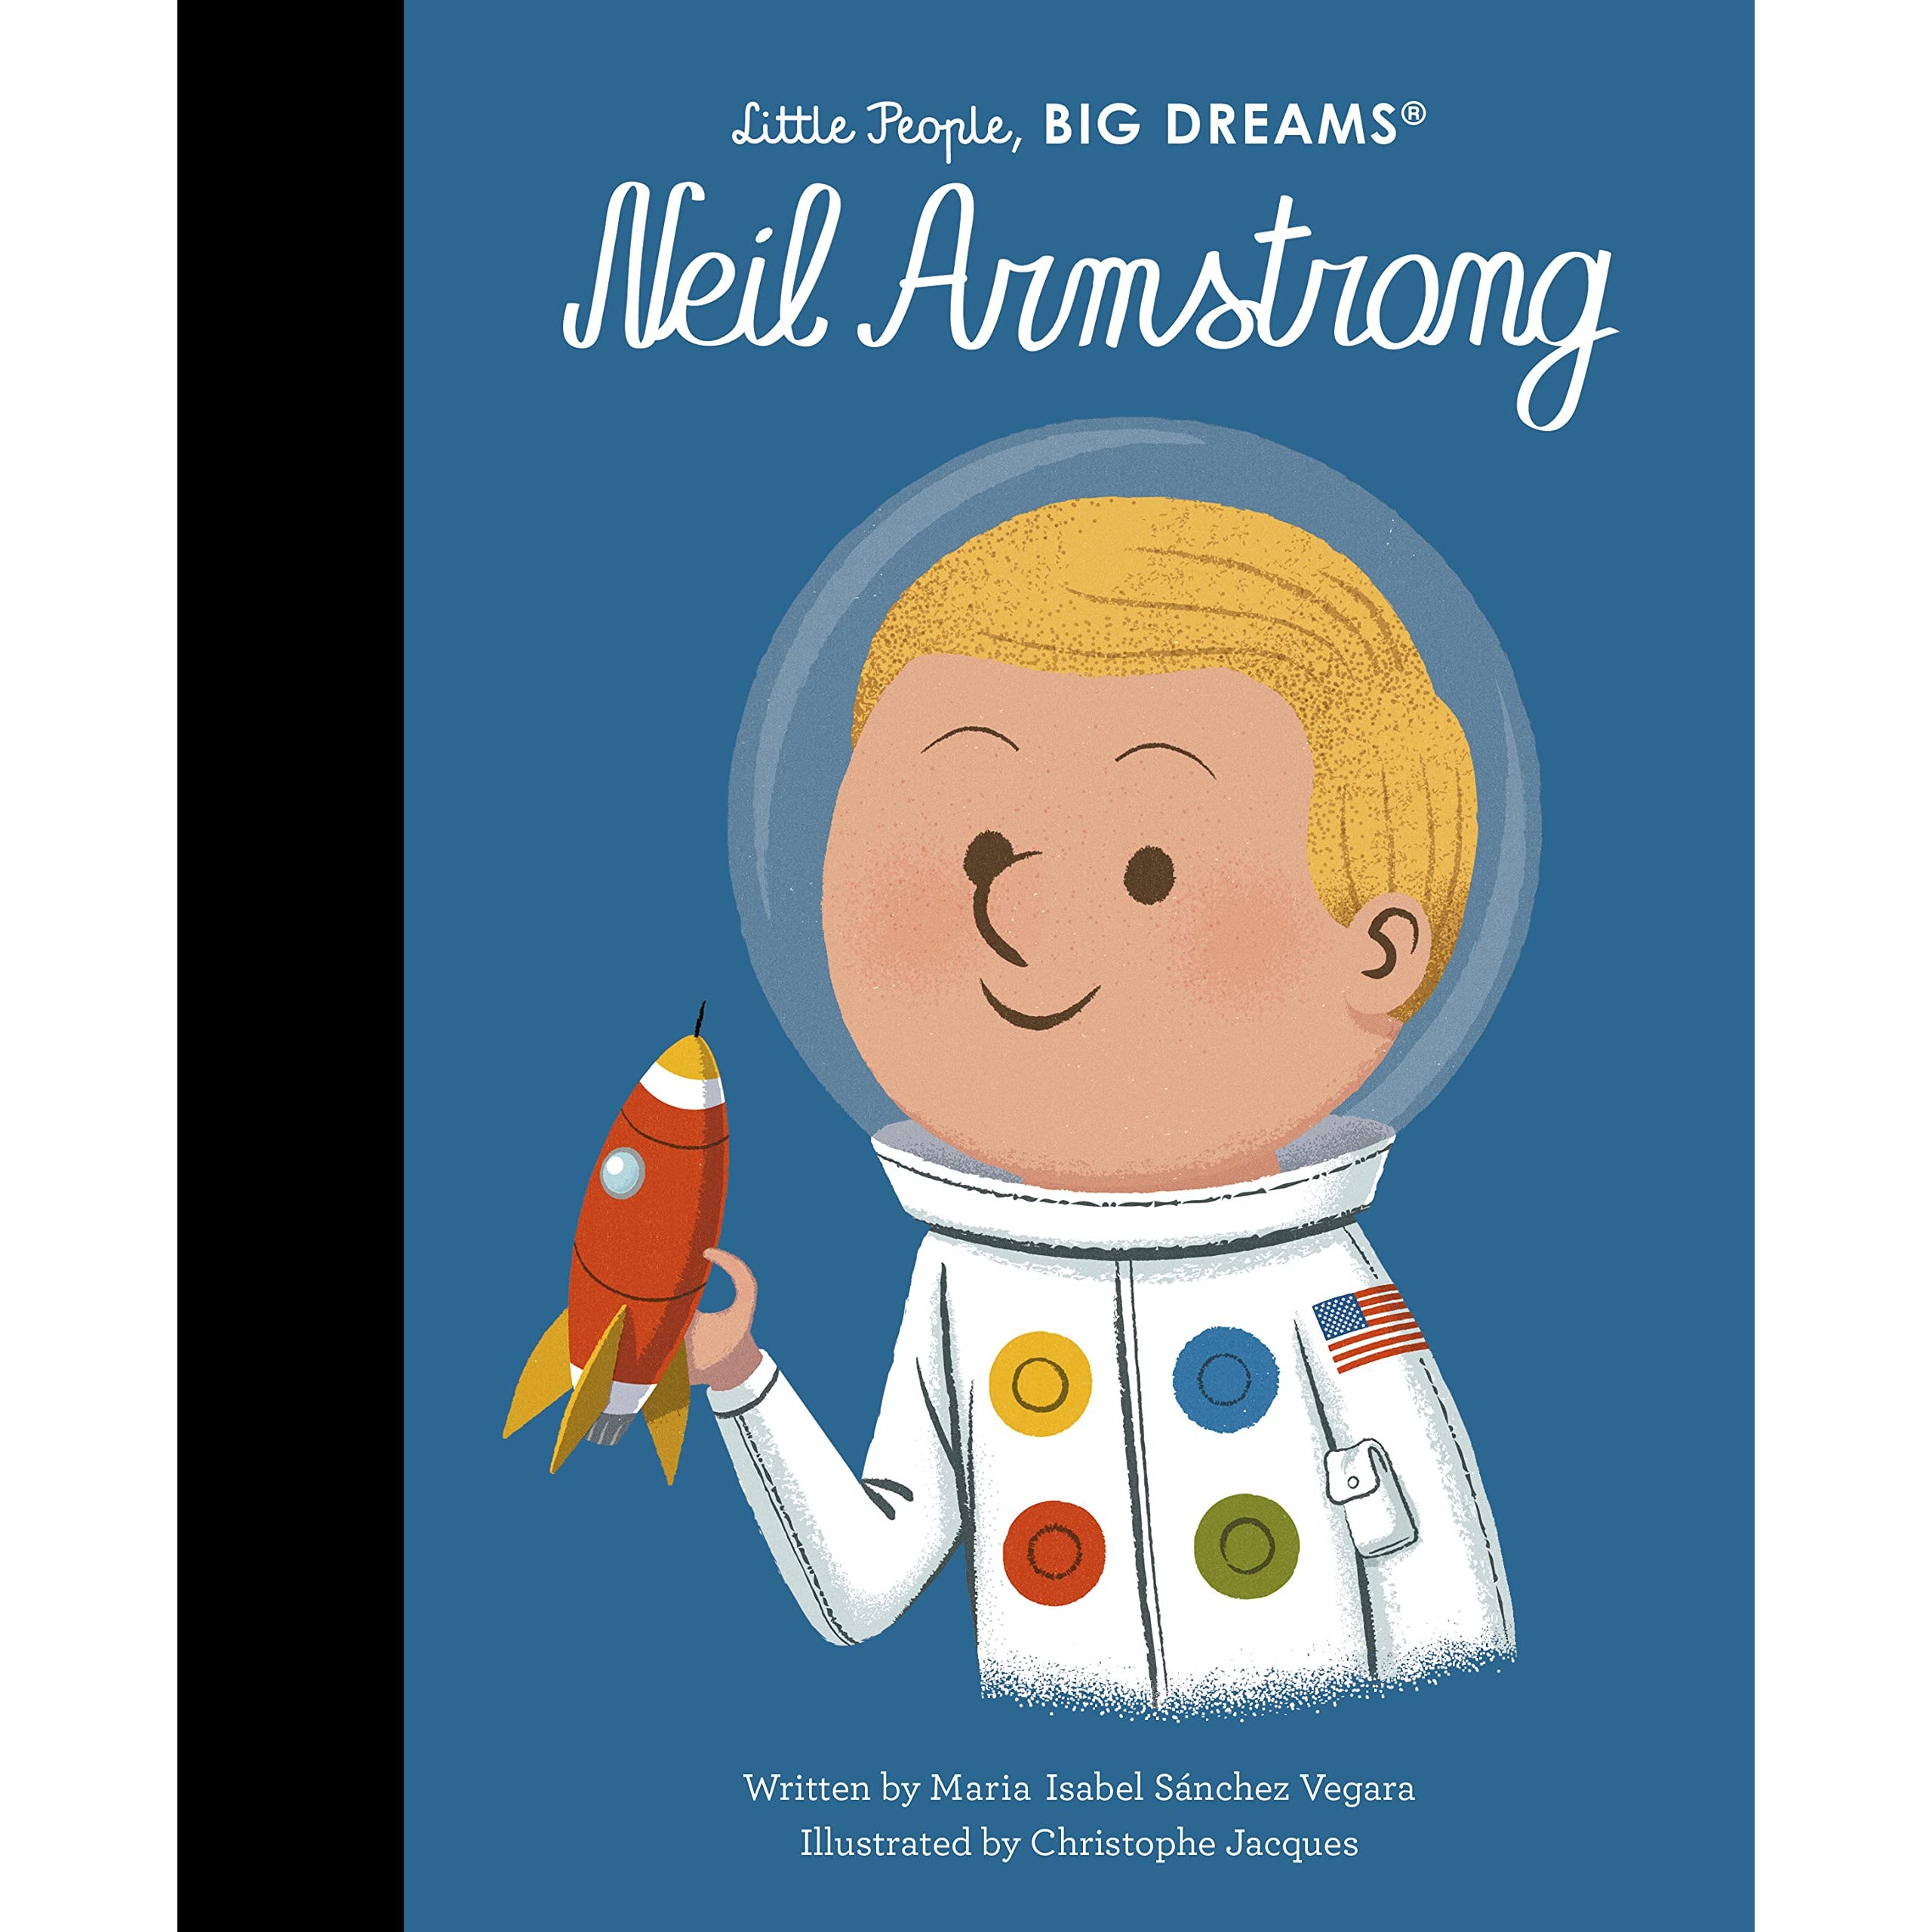 Neil Armstrong - Little People BIG DREAMS